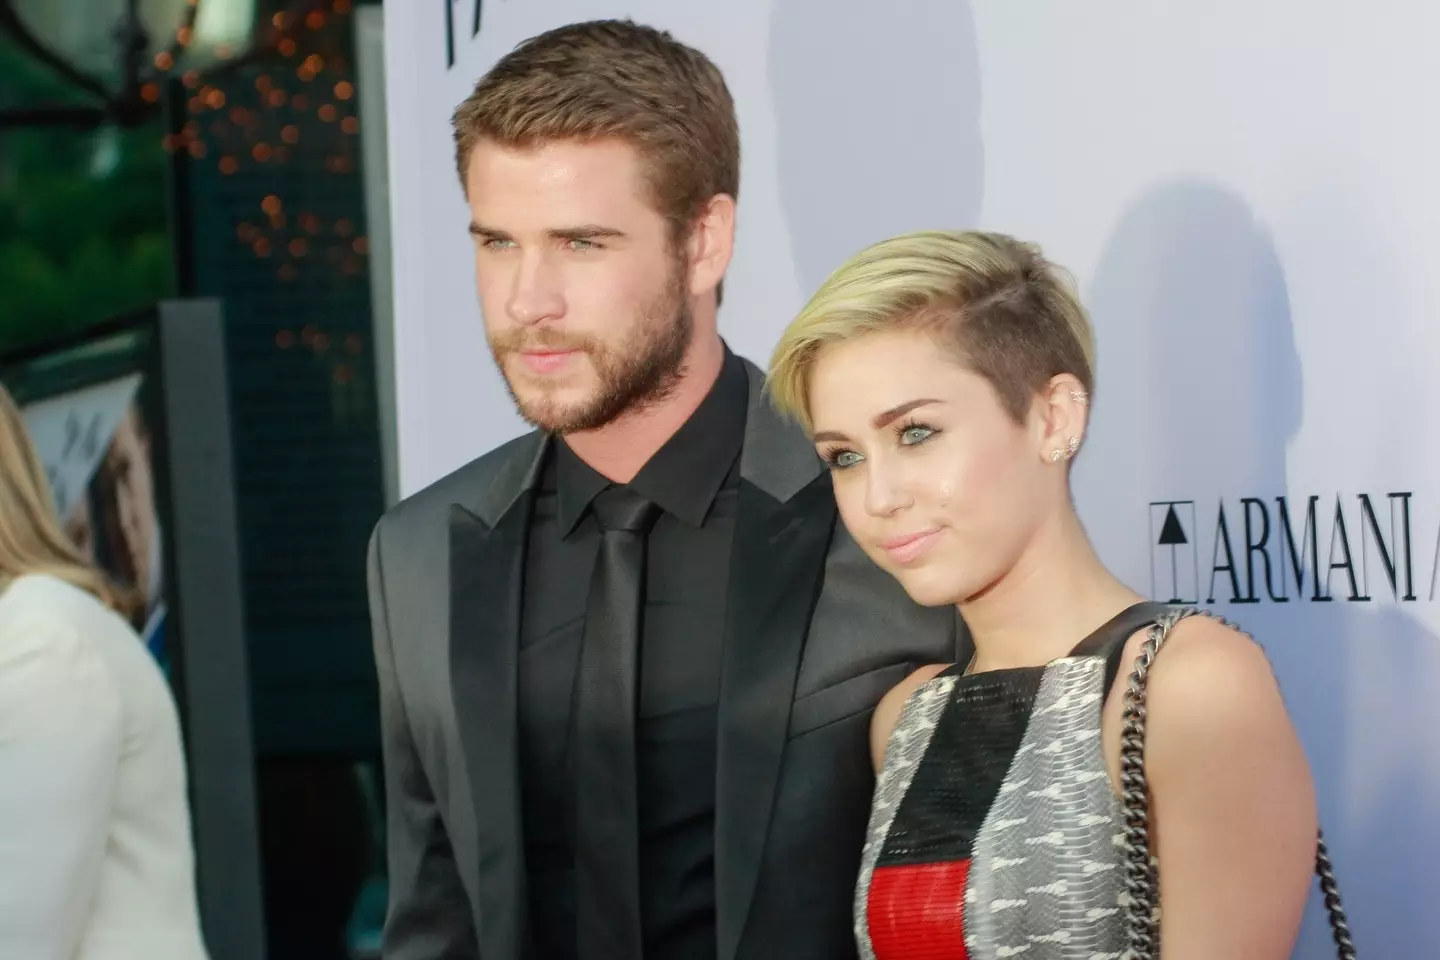 Miley Cyrus and Liam Hemsworth divorced in 2020.